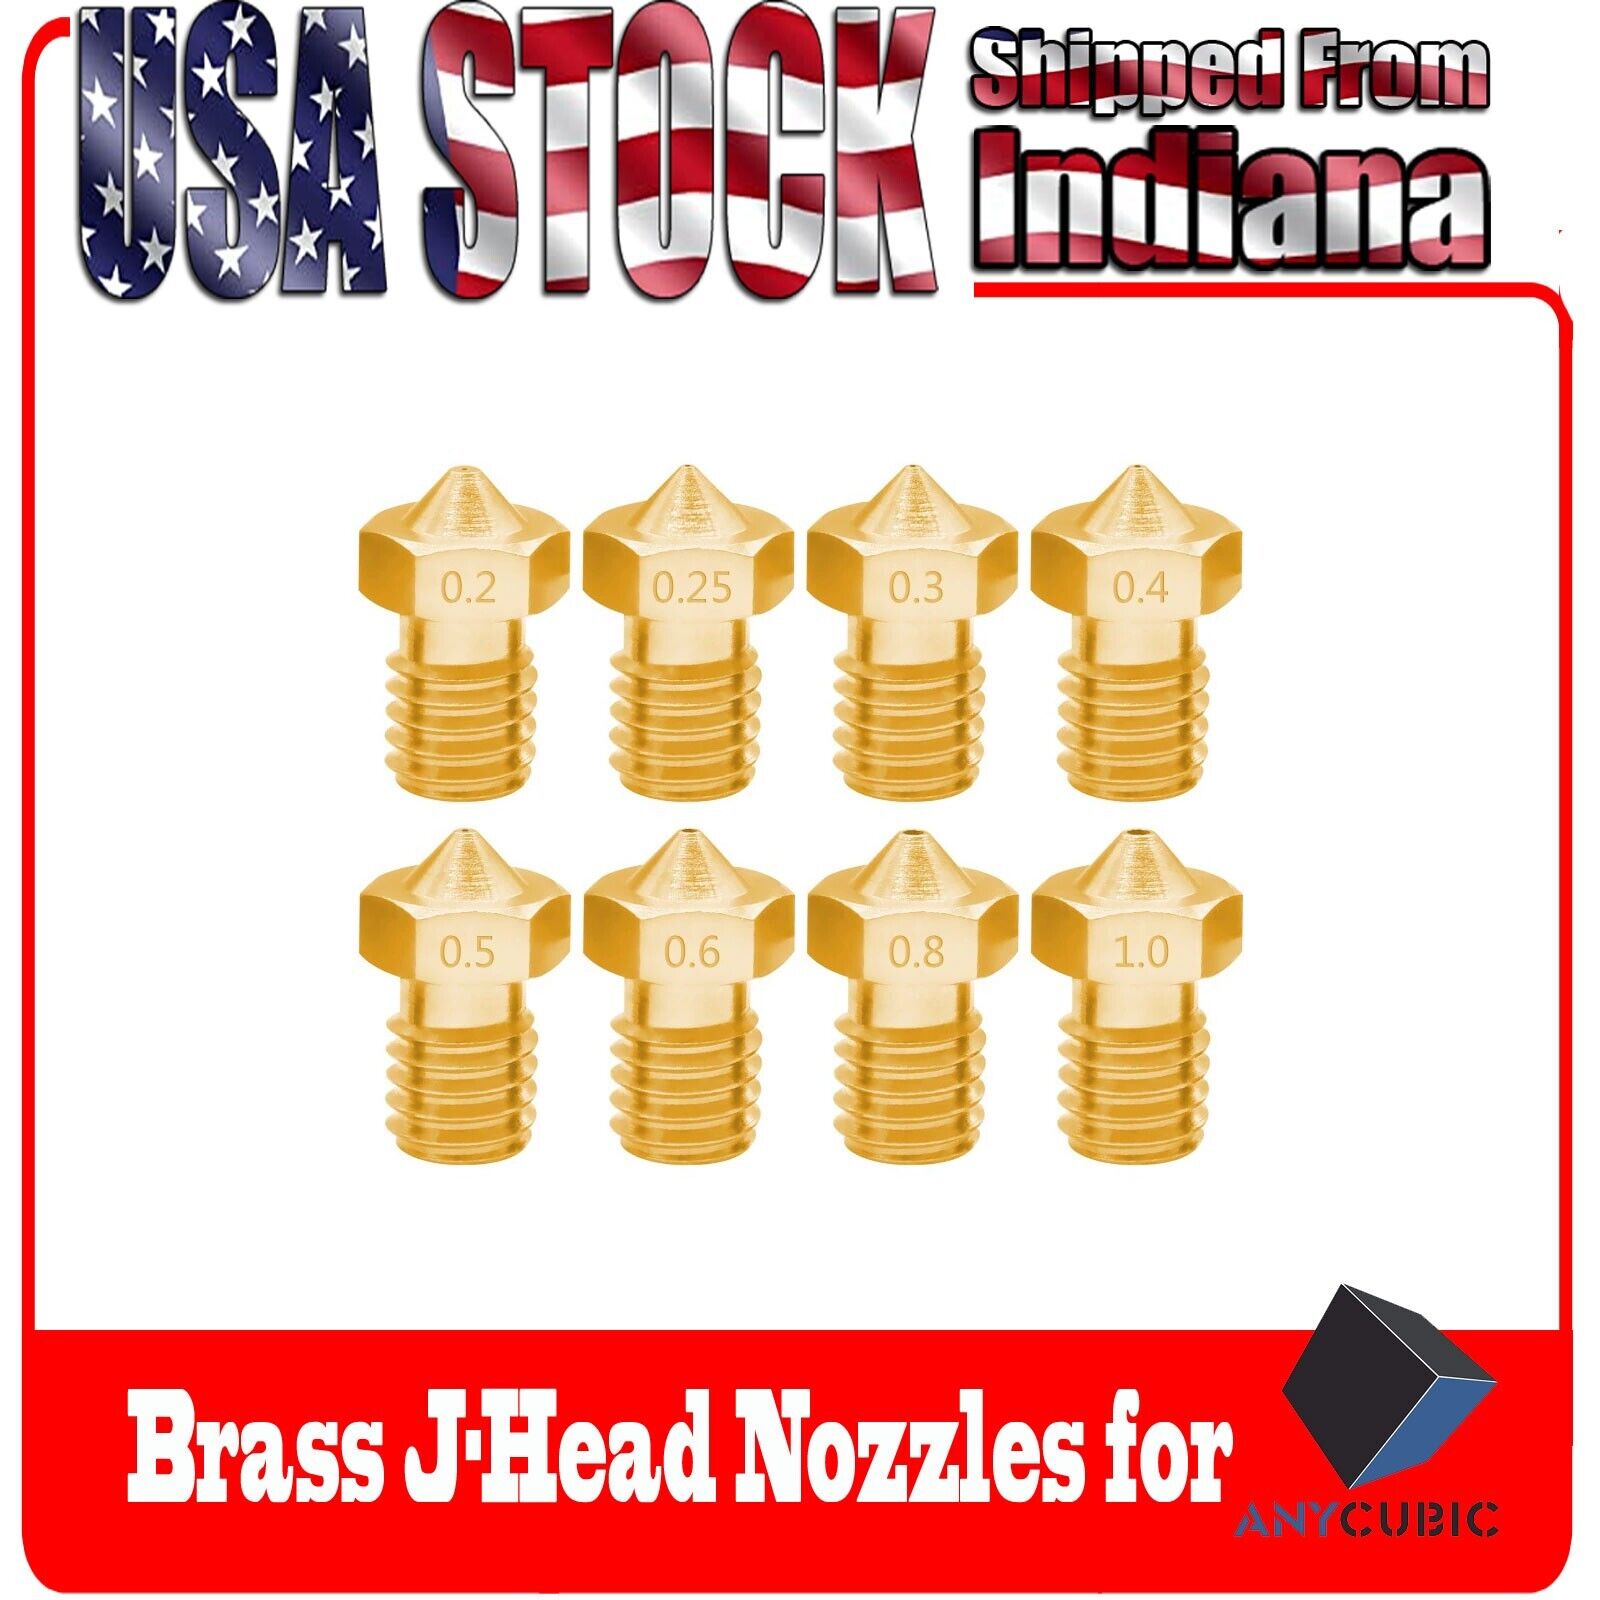 10X Lot ANYCUBIC Nozzle, M6 Solid Brass Nozzle 1.75mm Filament 3D Printer